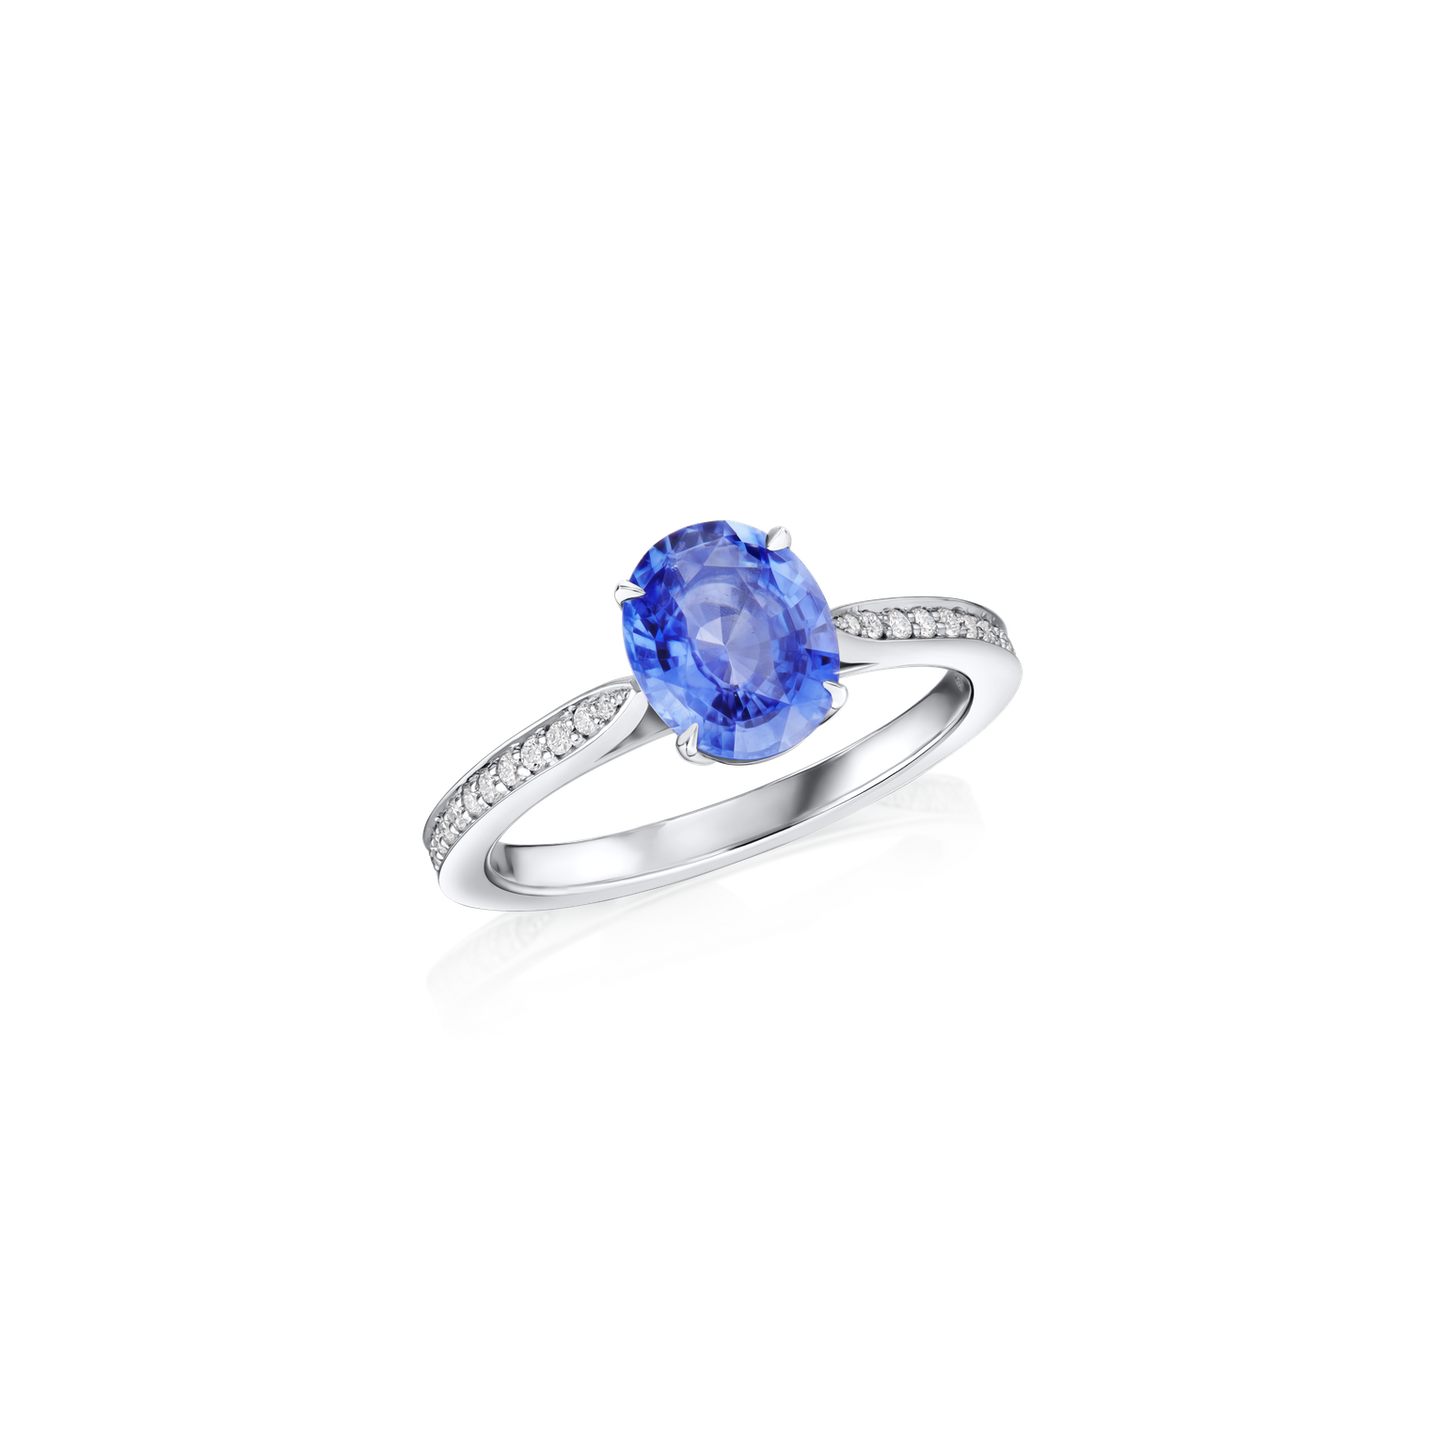 1.83cts Oval-Shape Blue Sapphire and Diamond Ring